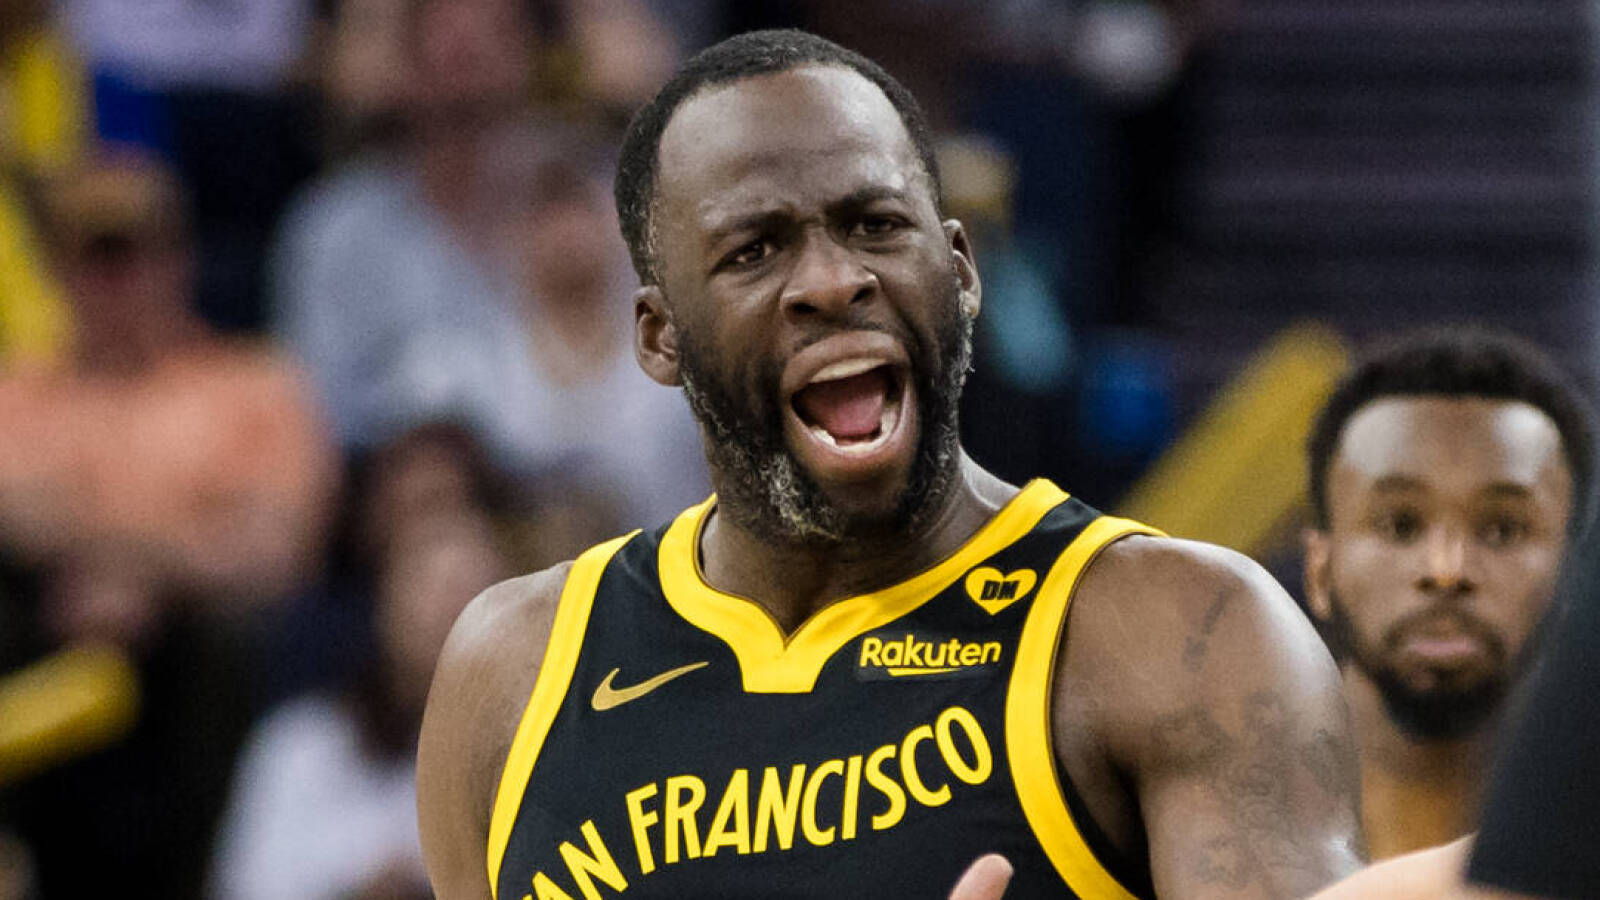 Draymond Green escalates war of words with 'embarrassment' Jusuf Nurkic